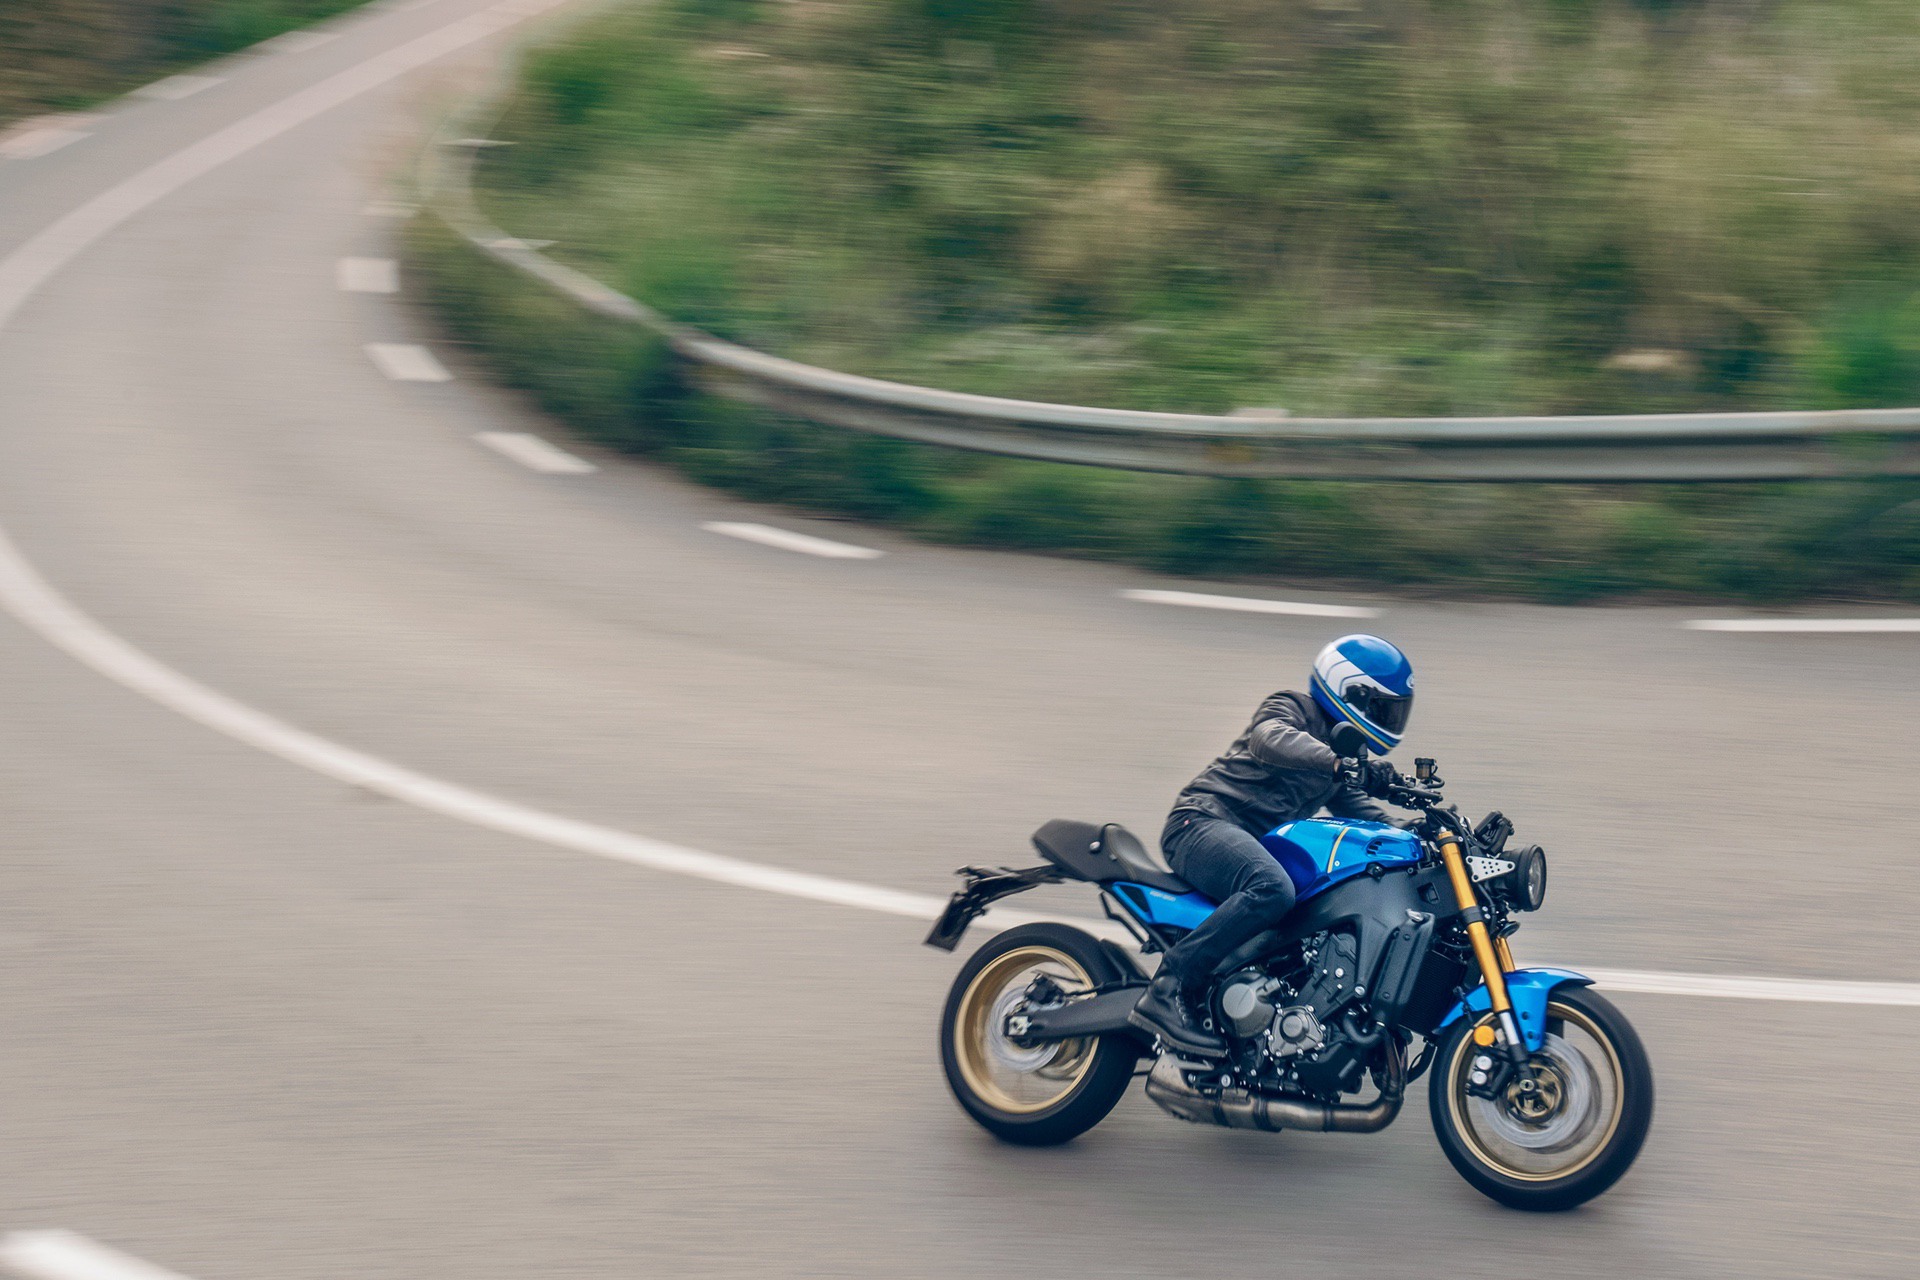 The 2022 Yamaha XSR900 motorcycle as it takes a corner